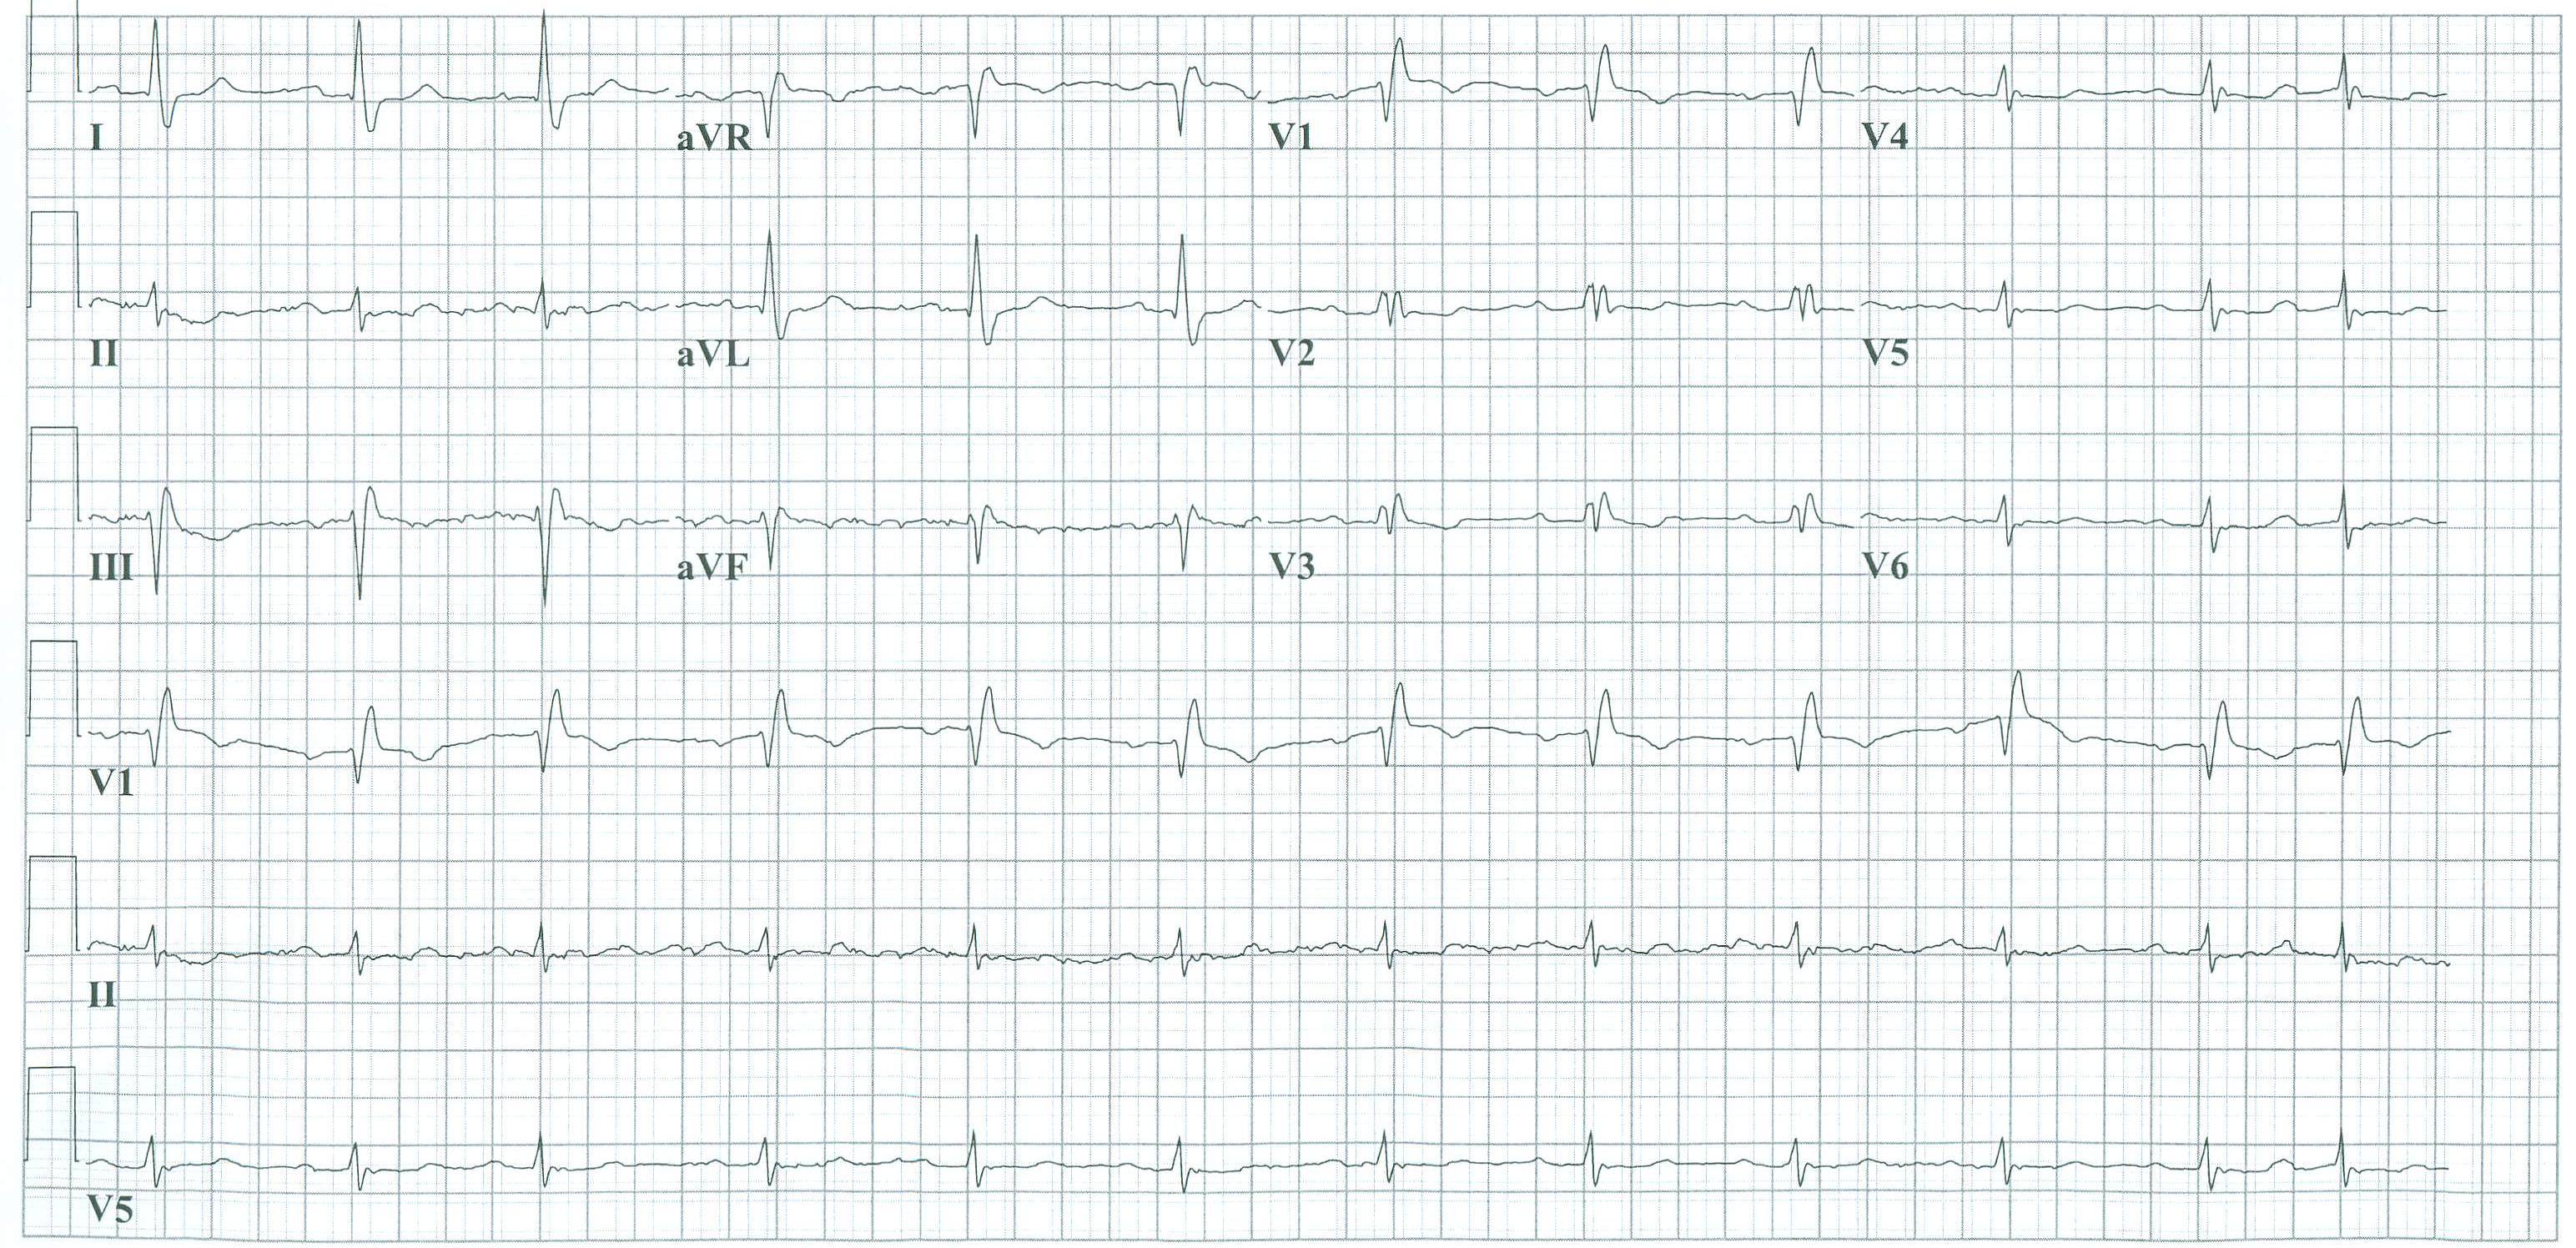 The same patient before acute MI developed. Horizontal axis.